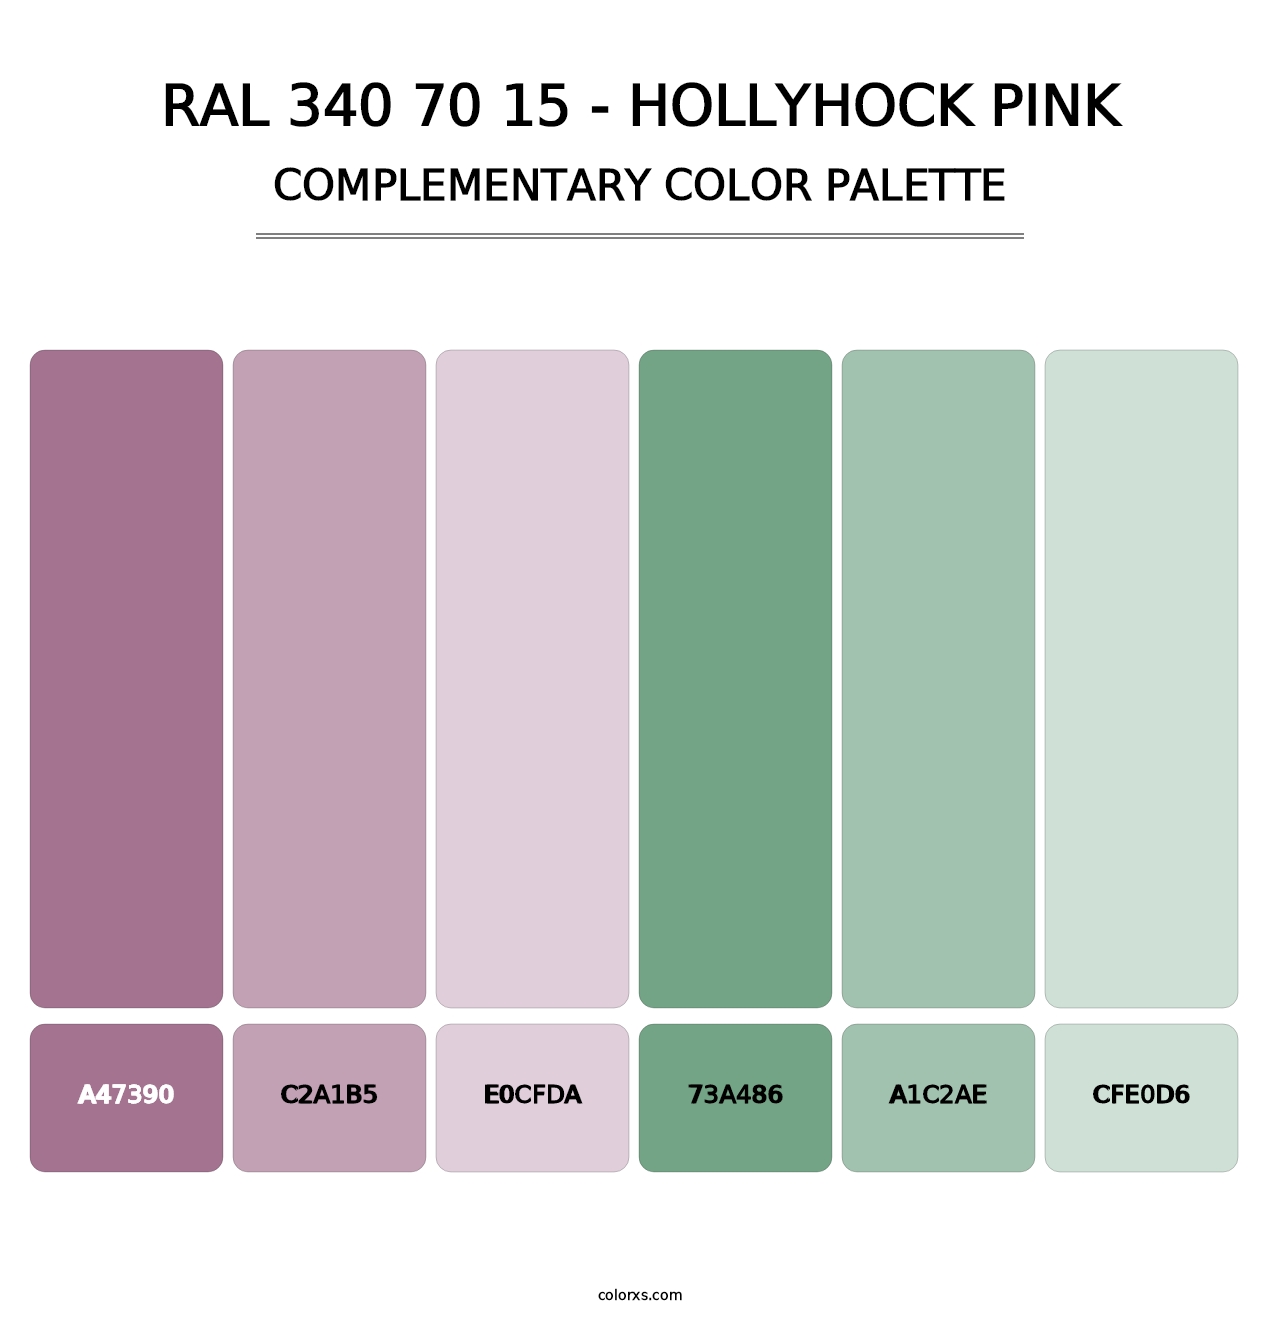 RAL 340 70 15 - Hollyhock Pink - Complementary Color Palette